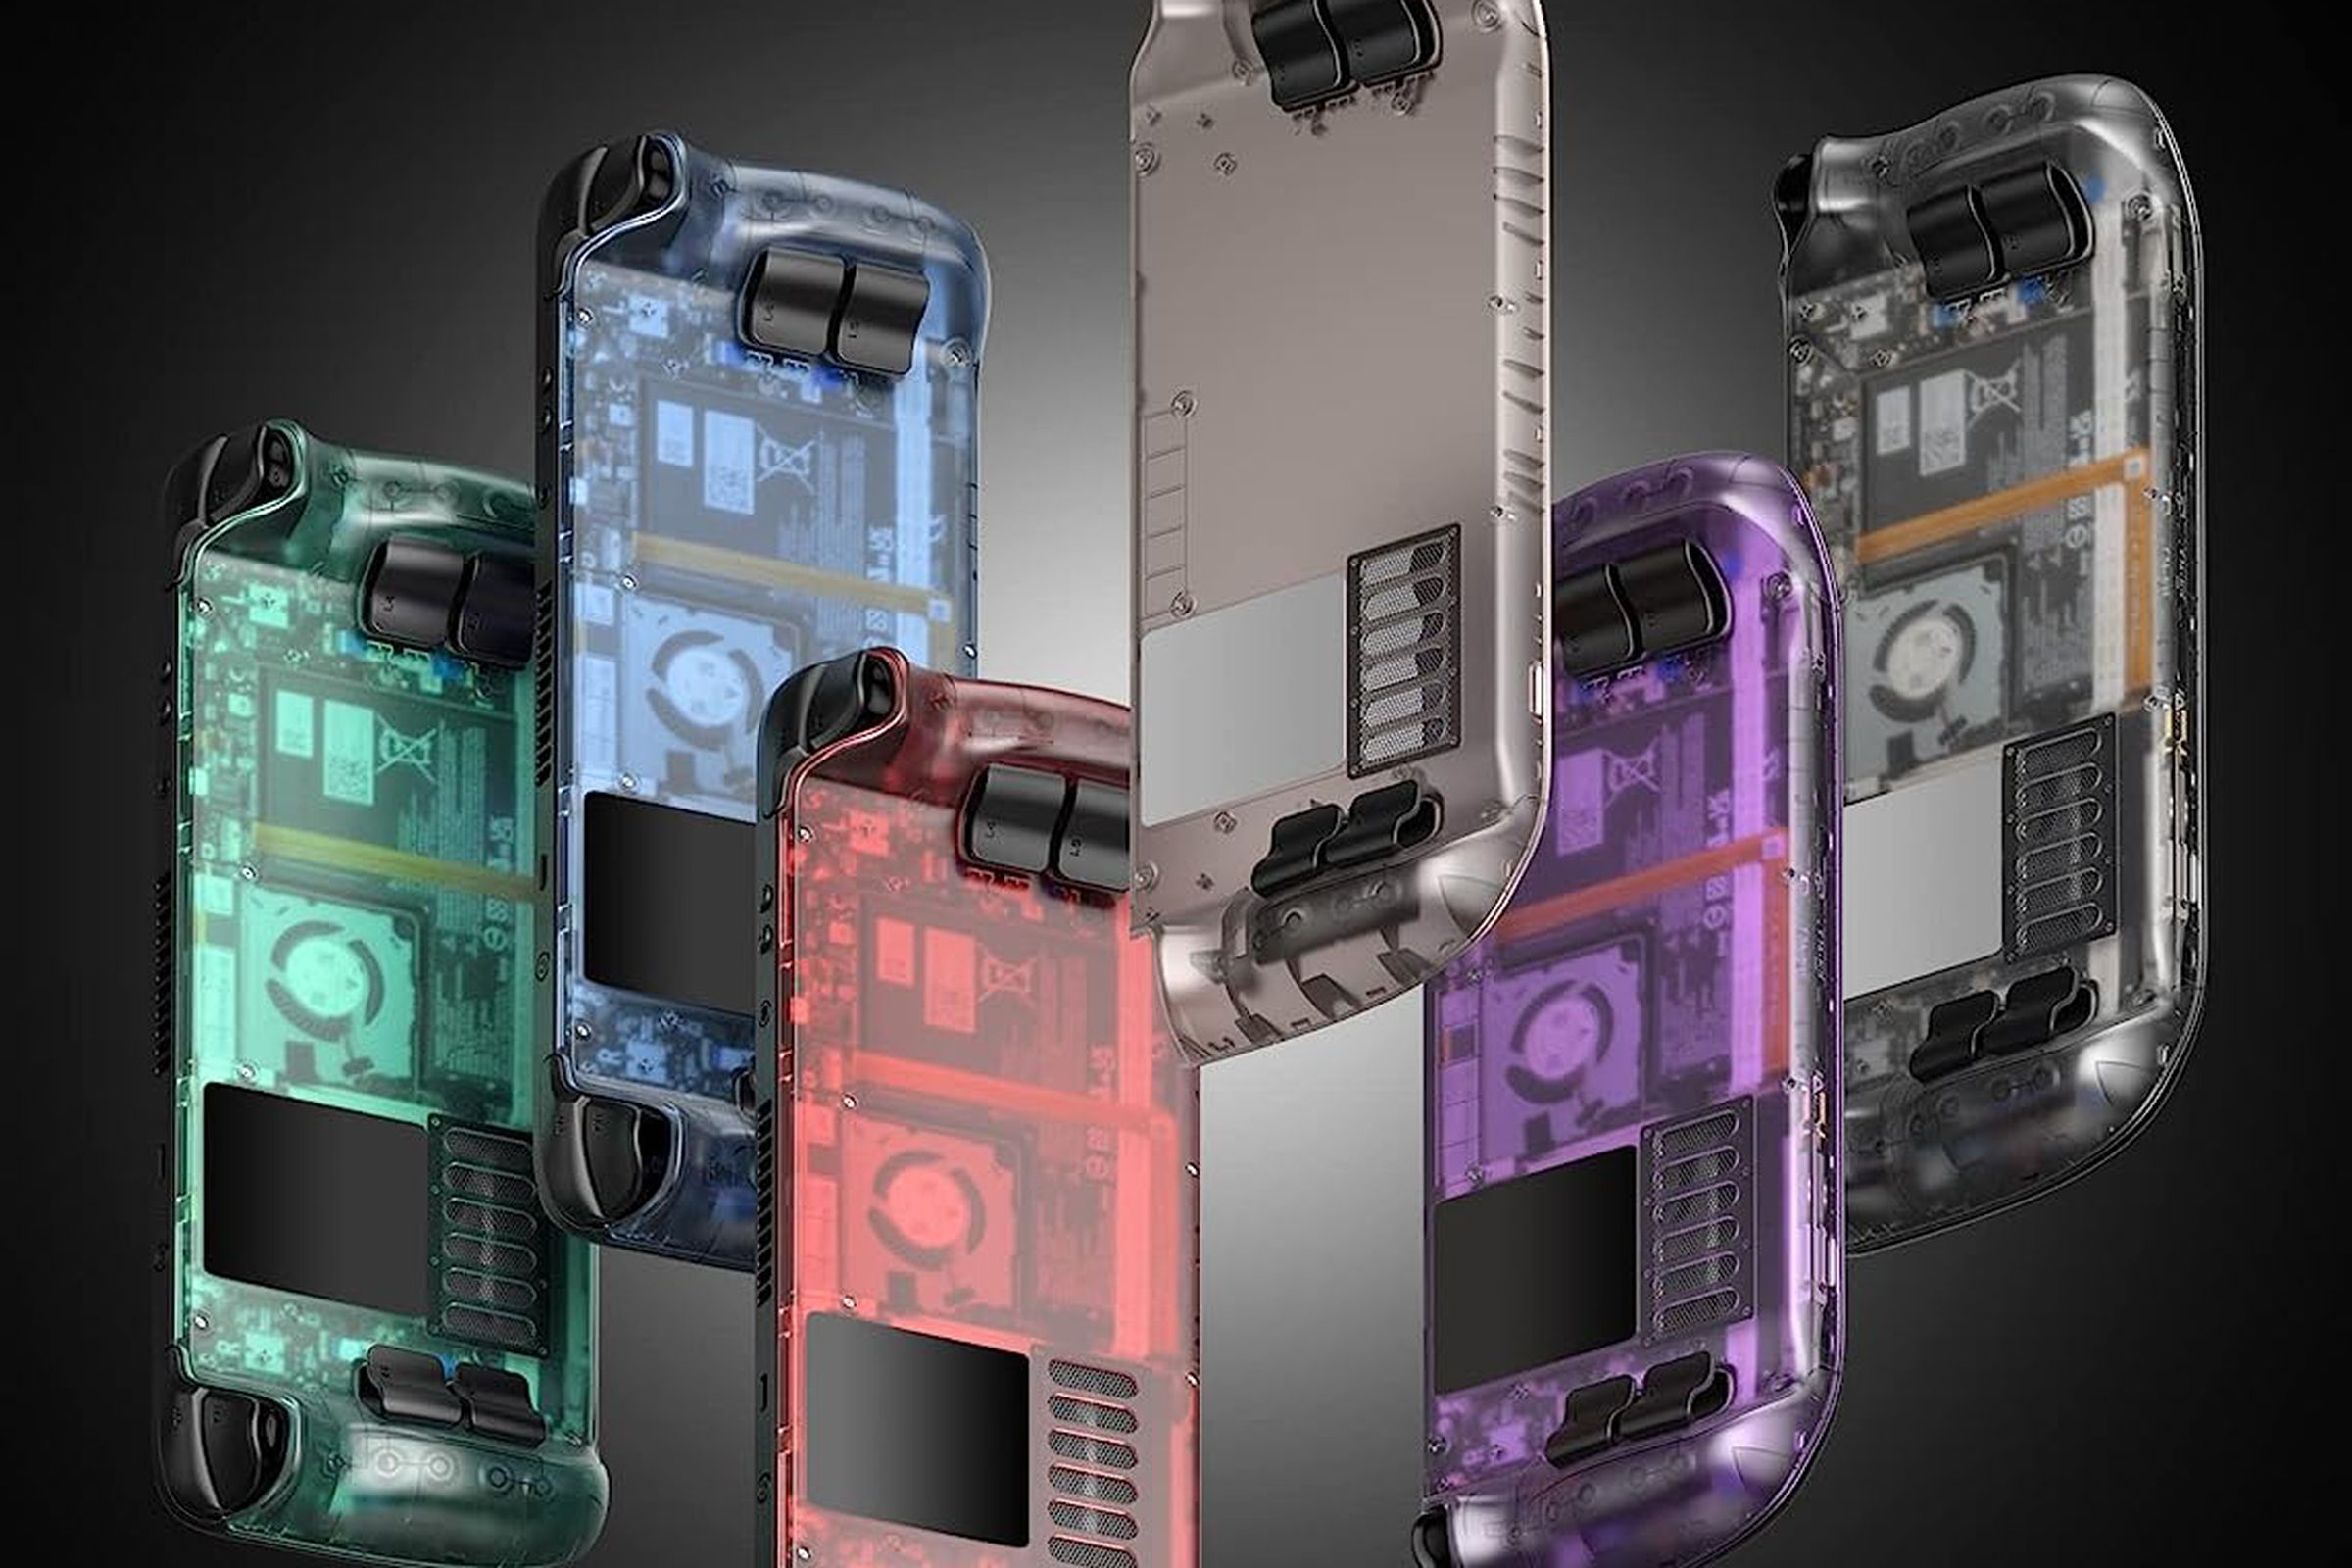 A lineup of Steam Deck handheld PC consoles outfitted in Jsaux’s colorful see-through backplates.